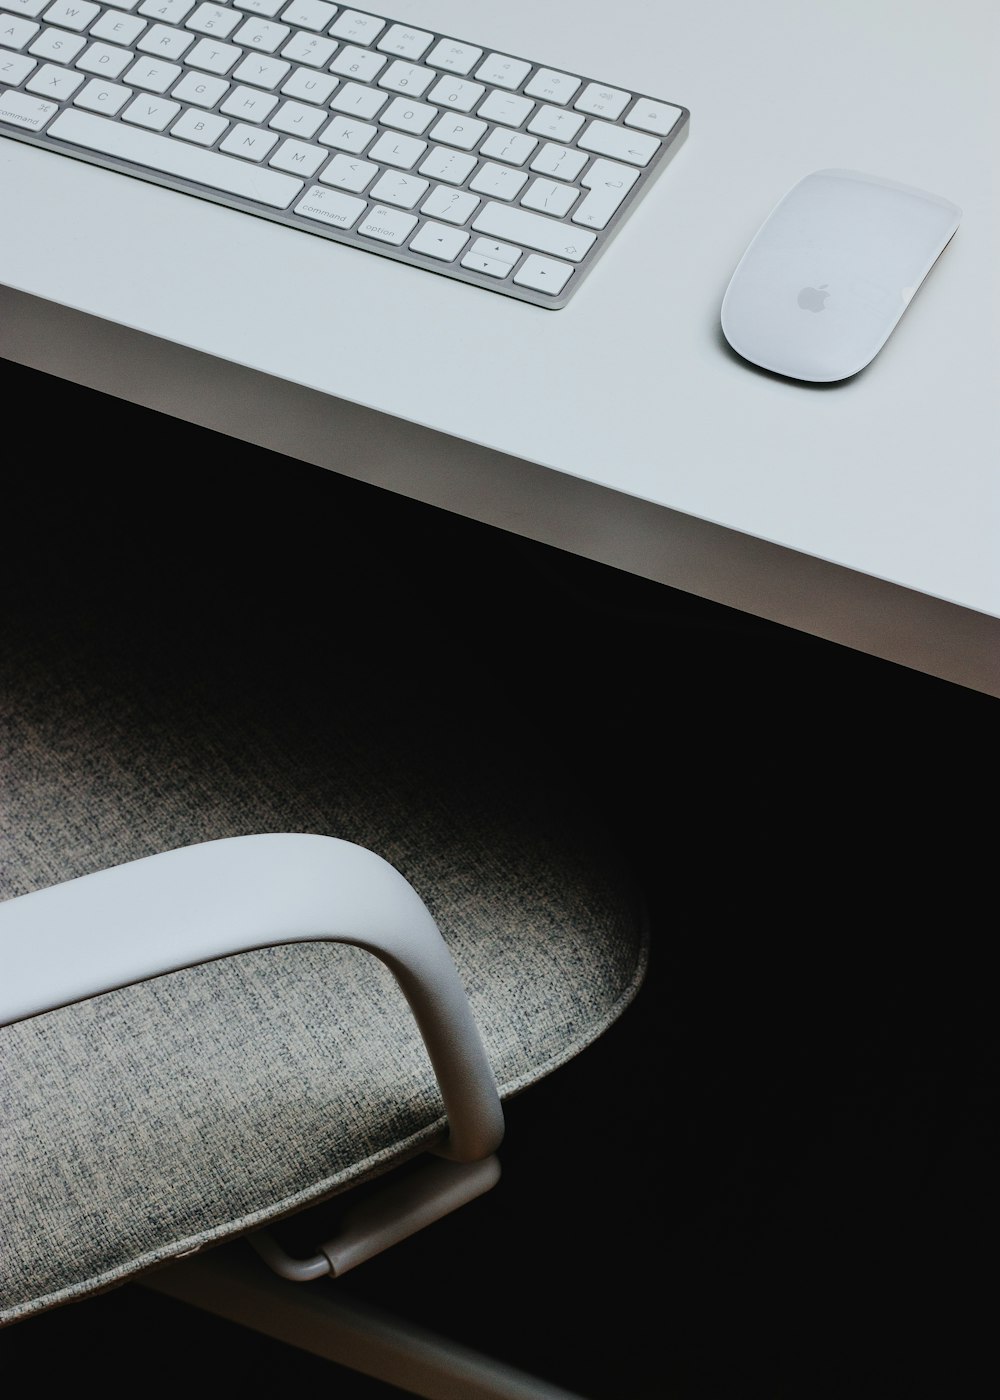 Magic Mouse and Magic Keyboard on table